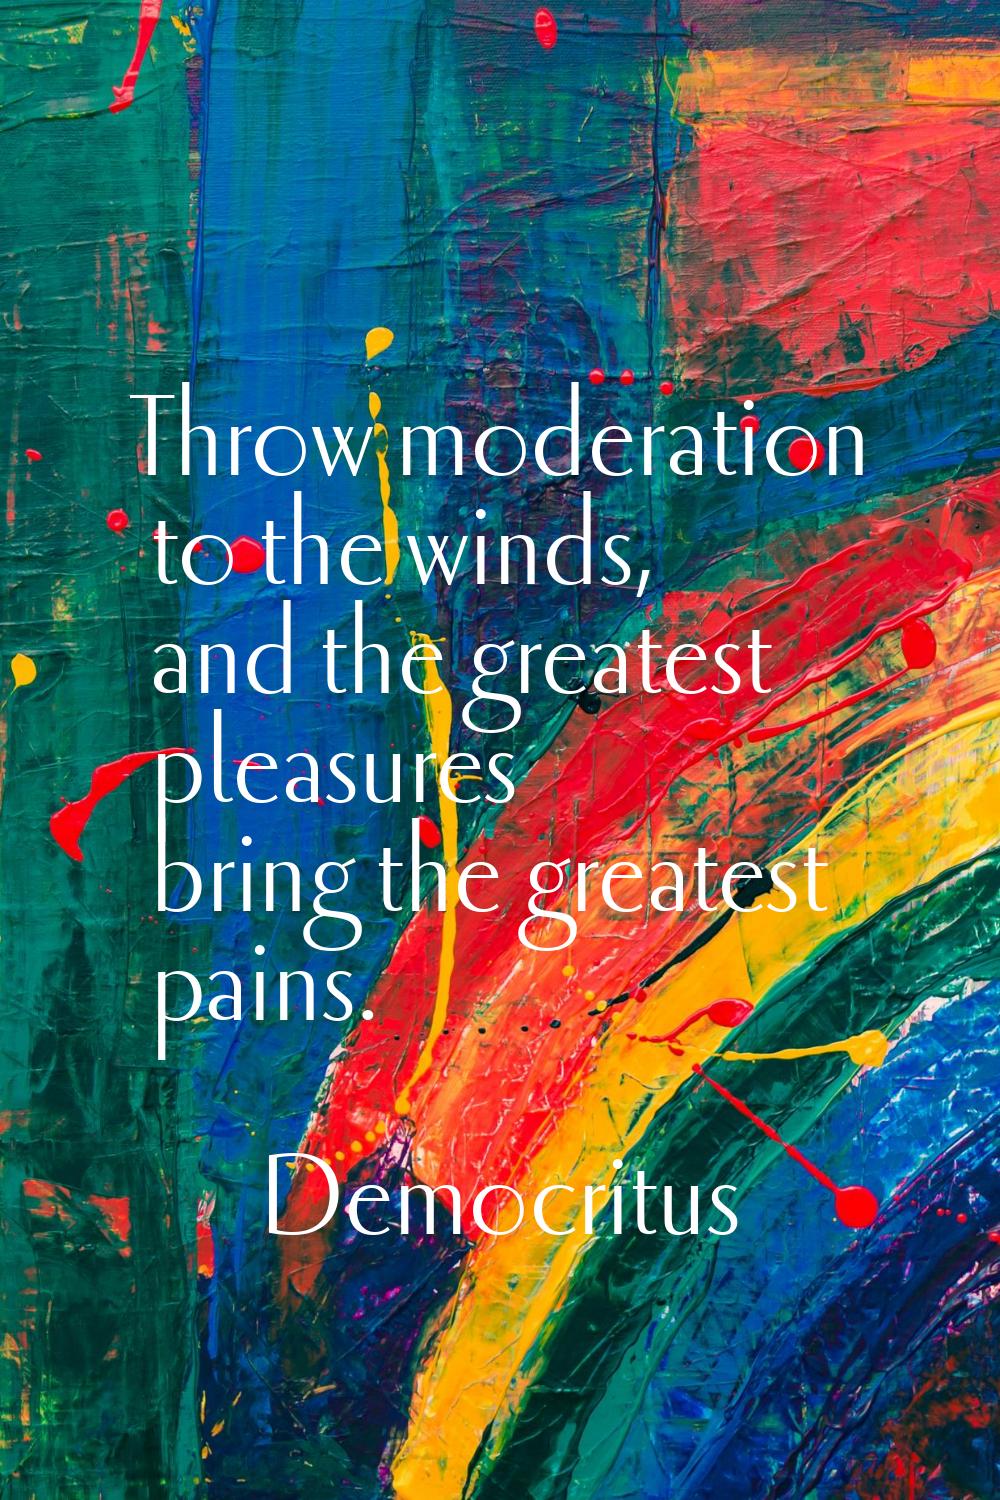 Throw moderation to the winds, and the greatest pleasures bring the greatest pains.